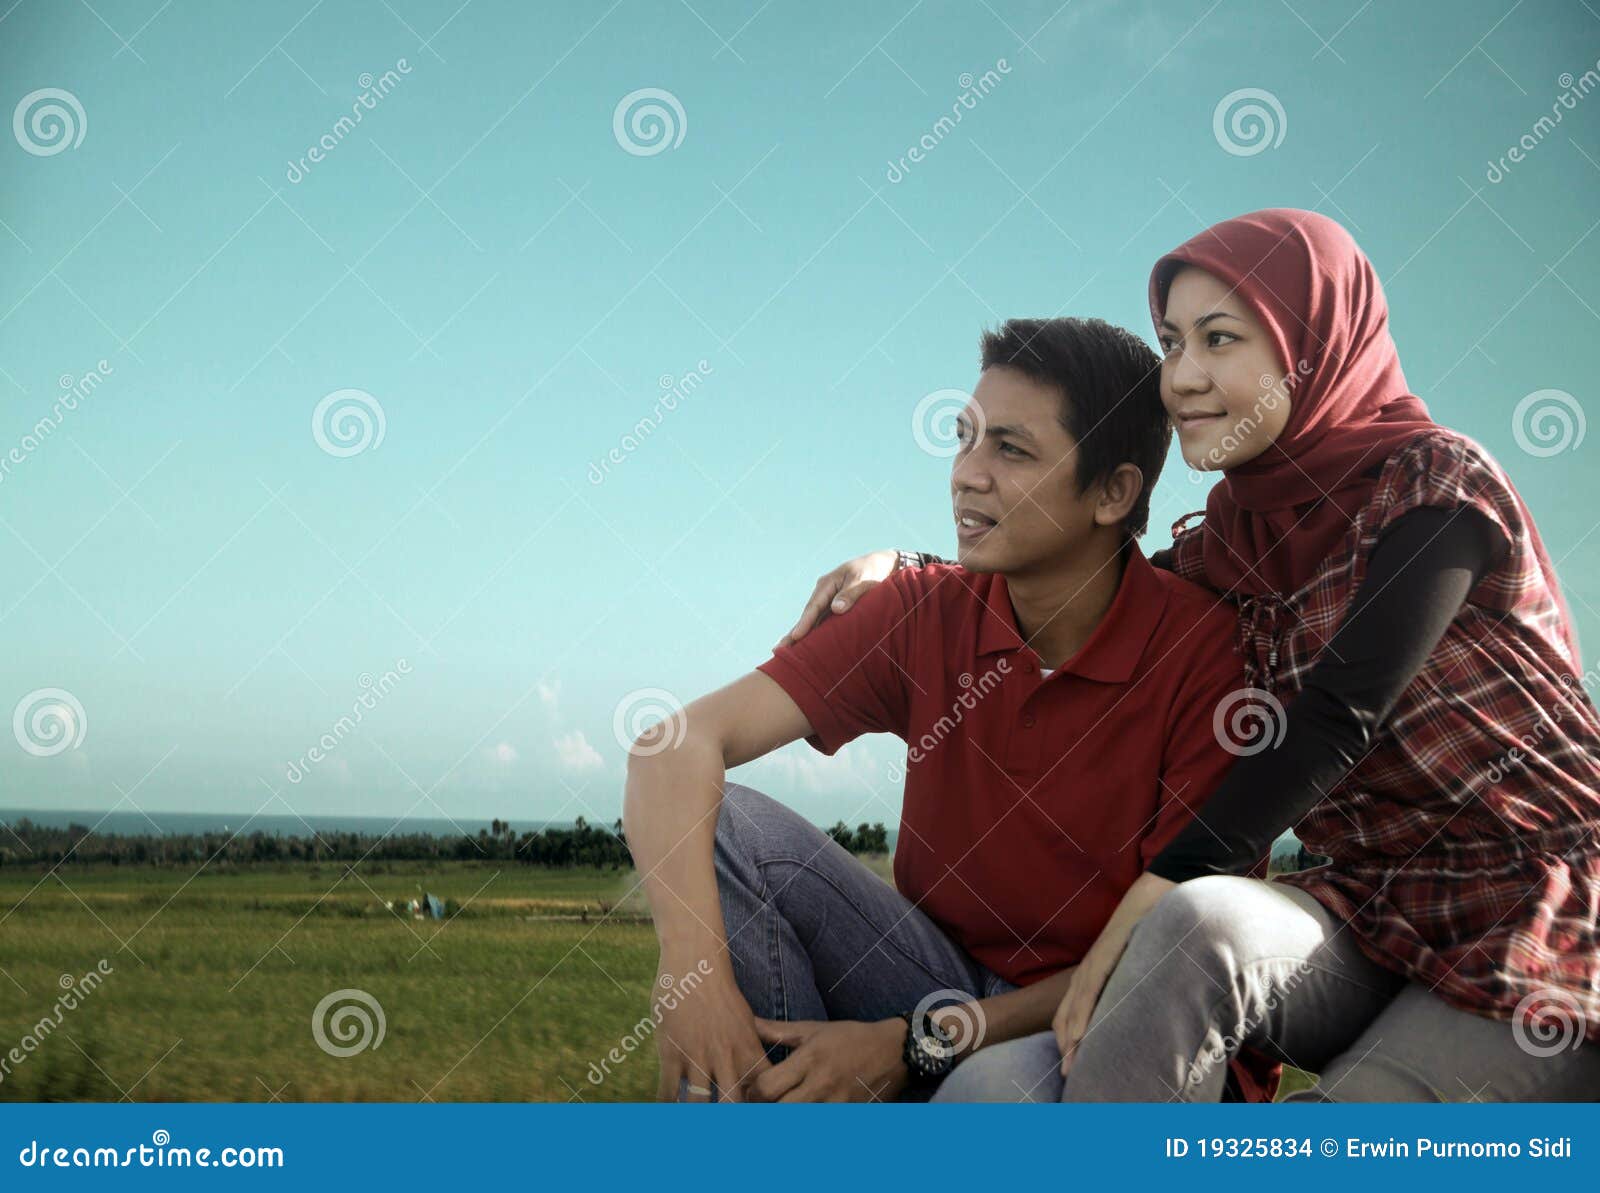 Muslim couple outdoor stock photo. Image of photograph - 19325834